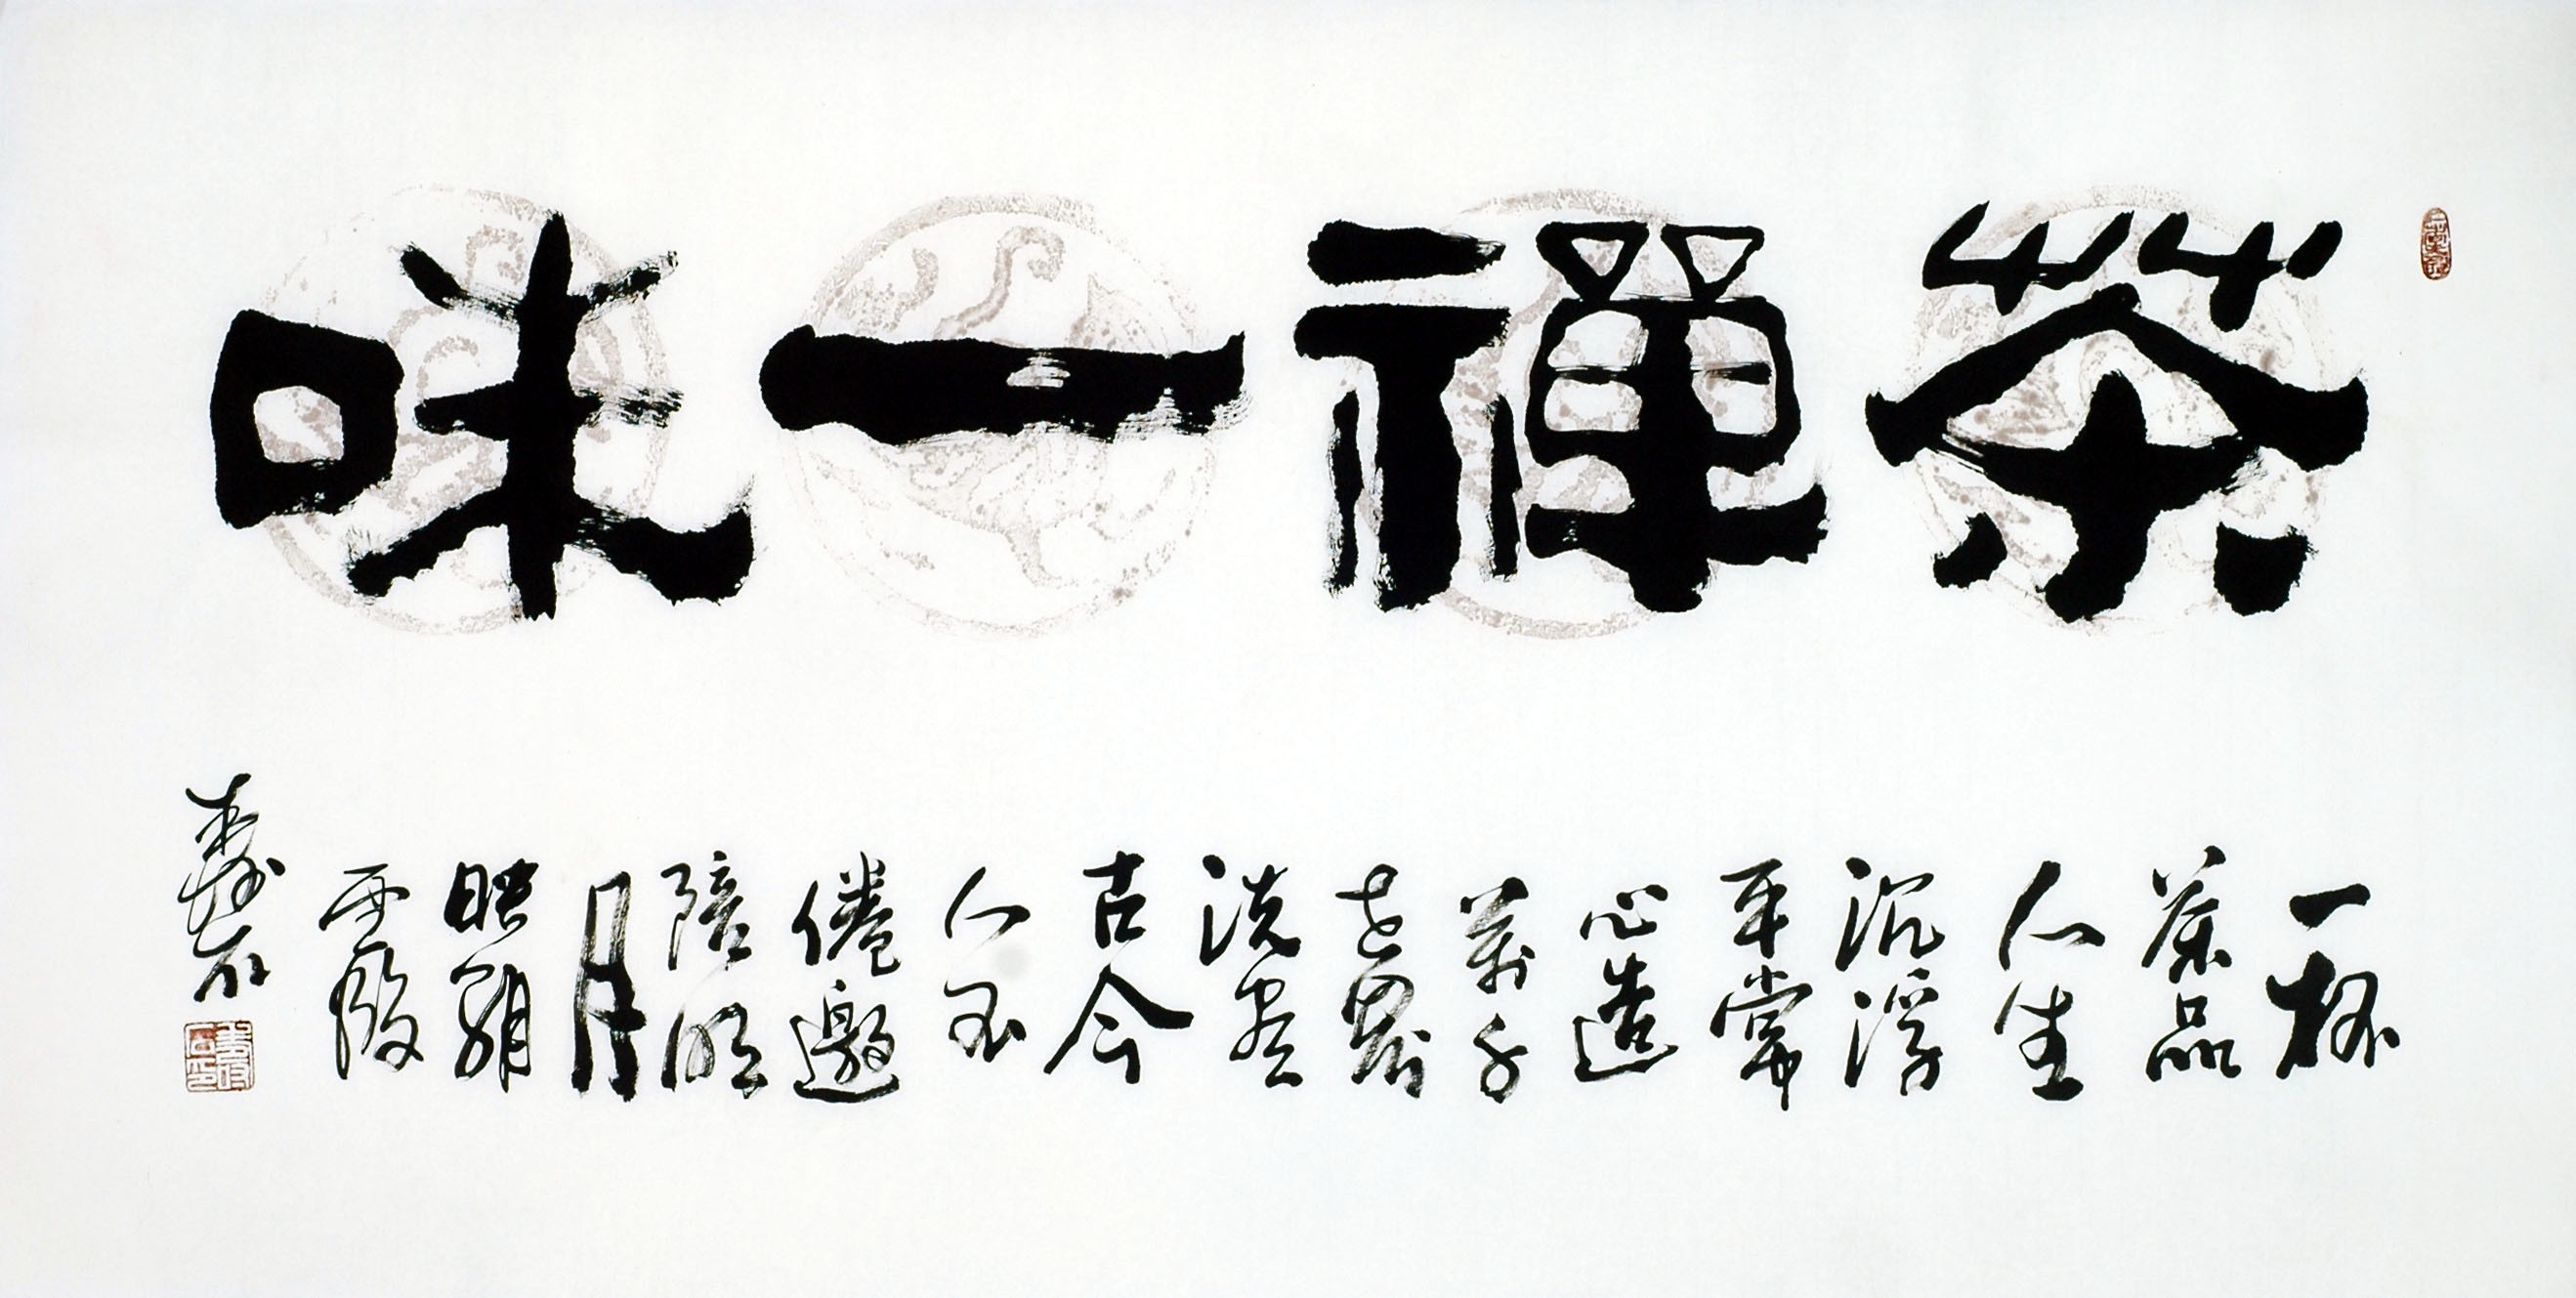 Chinese Clerical Script Painting - CNAG011223